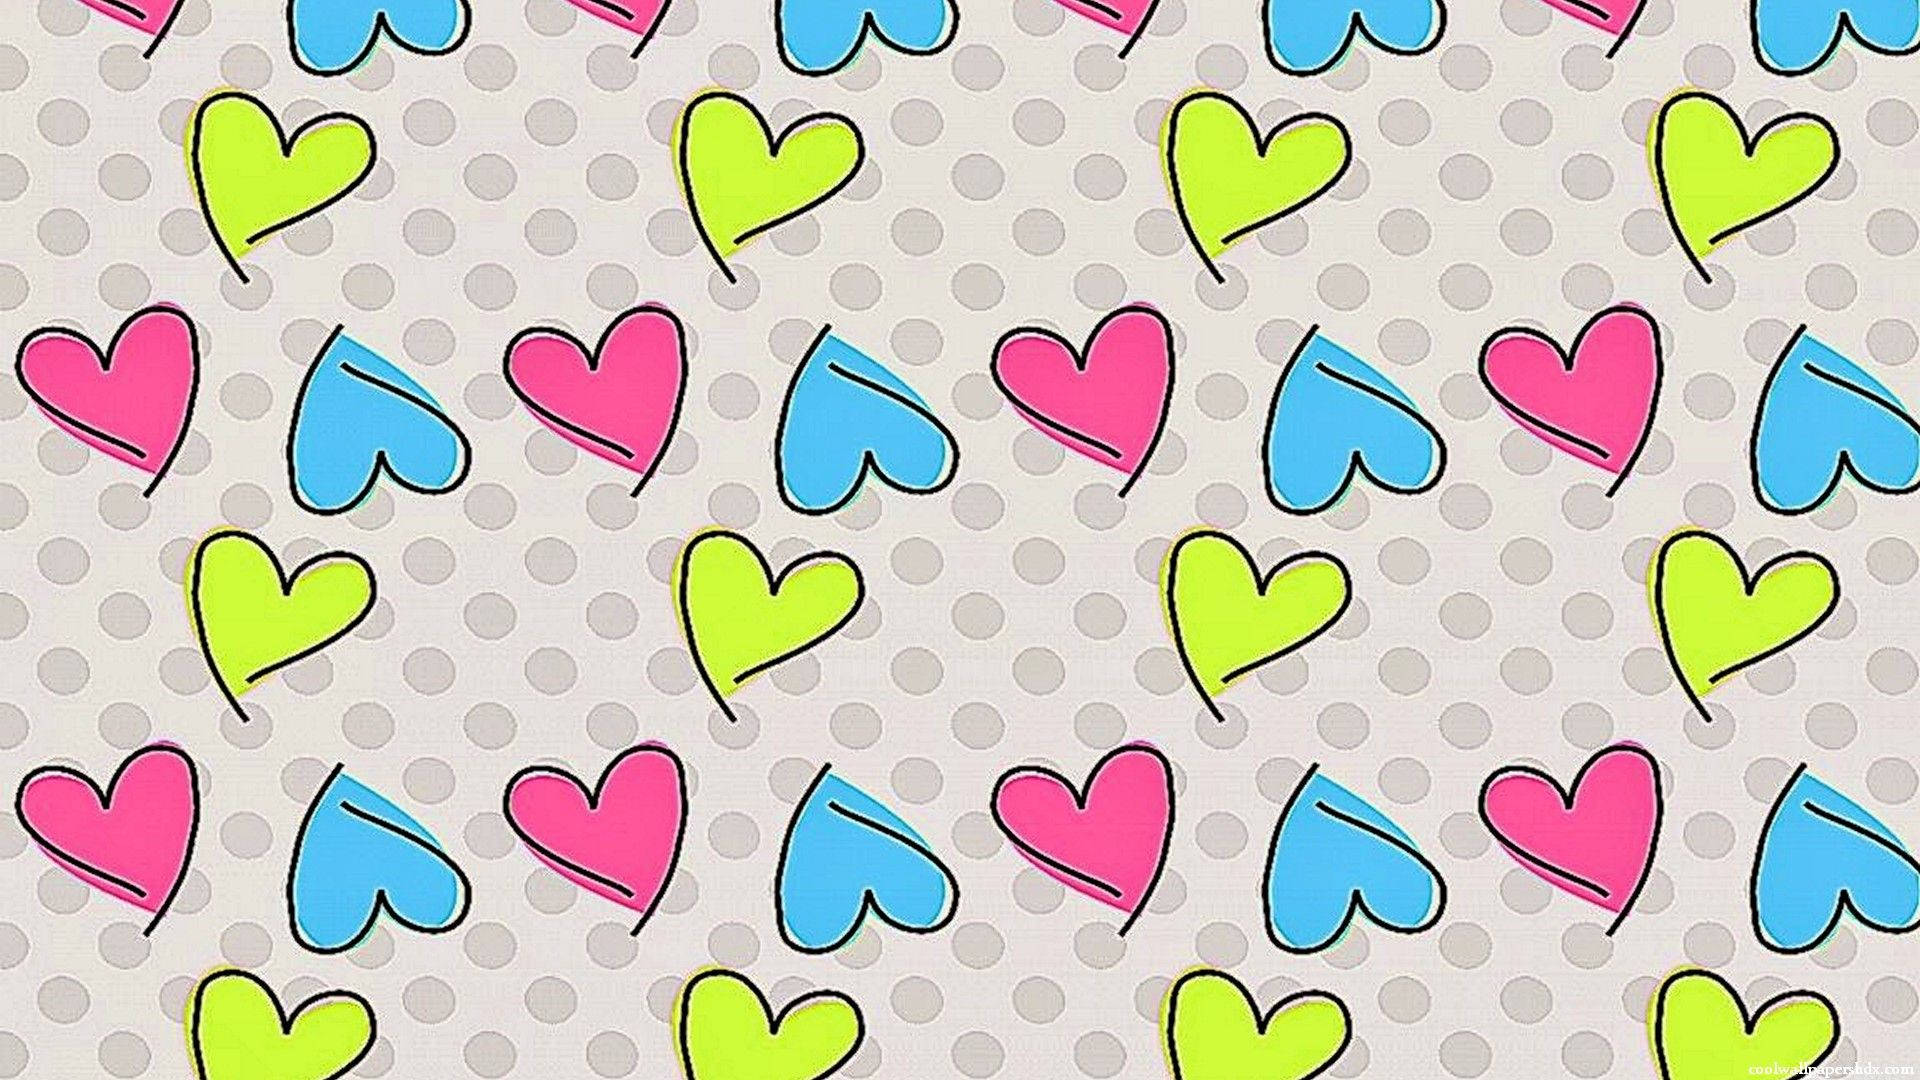 Enjoy life and make it colourful with this girly heart doodle pattern Wallpaper